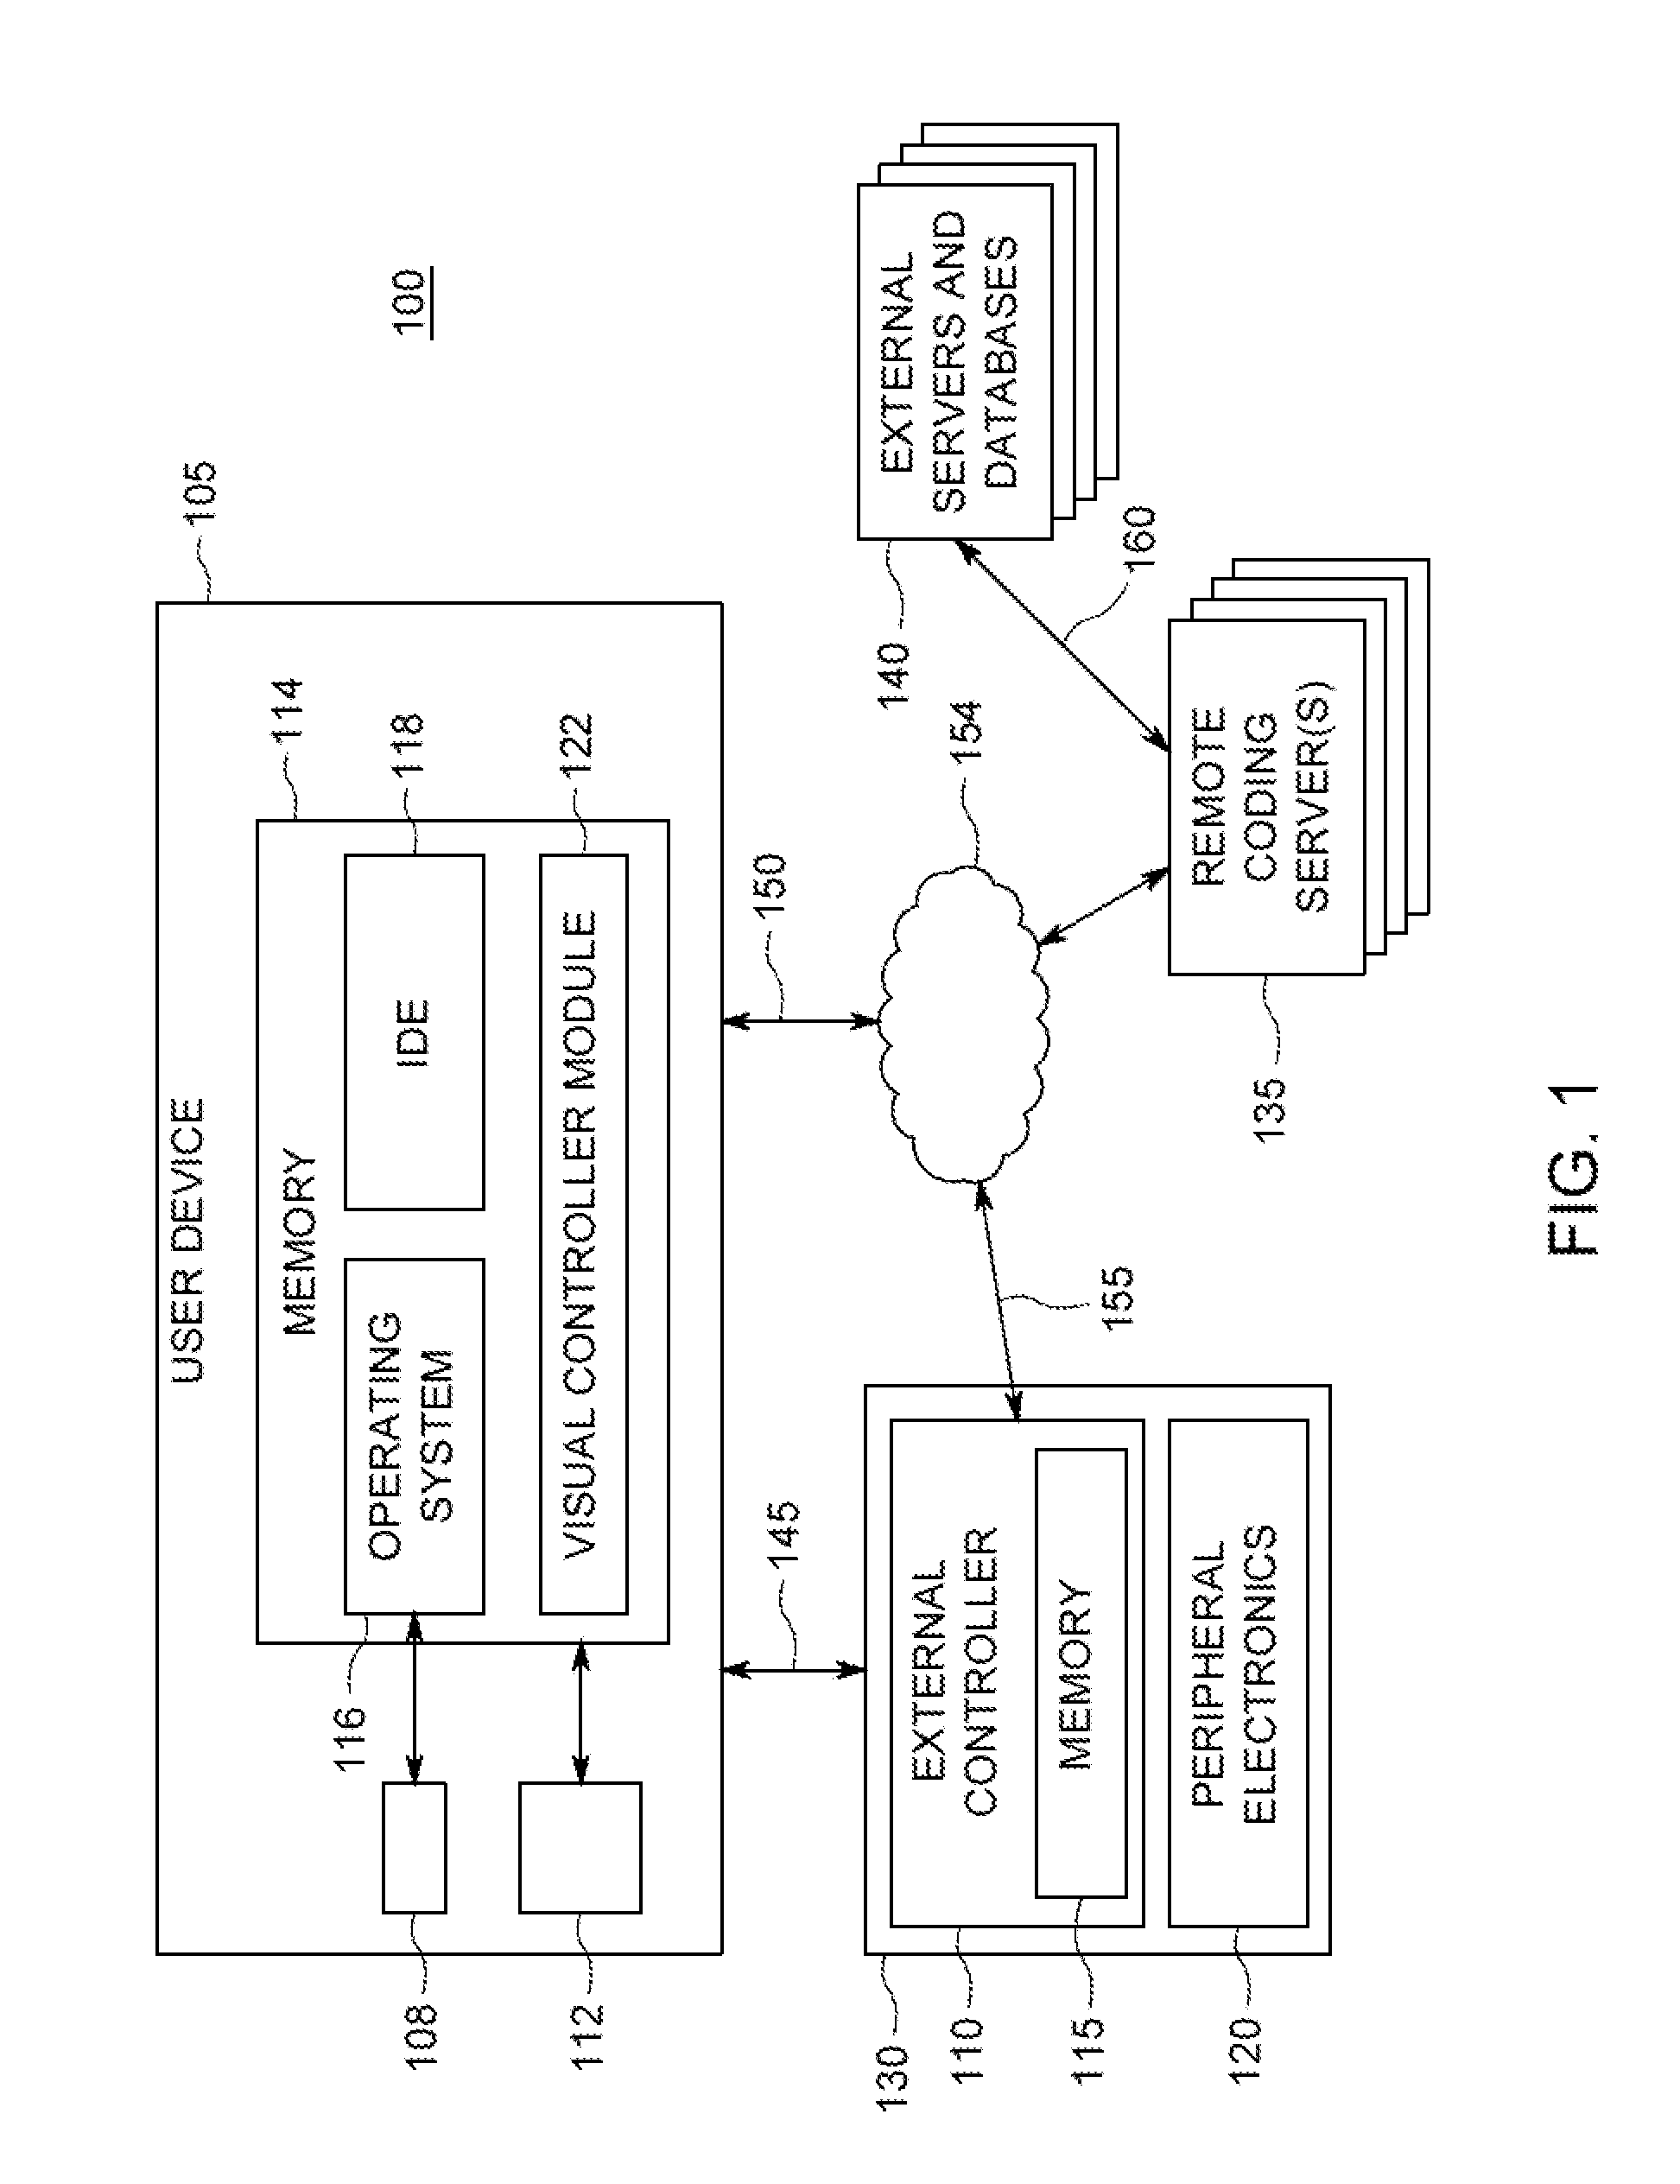 Method and apparatus for automatic device program generation